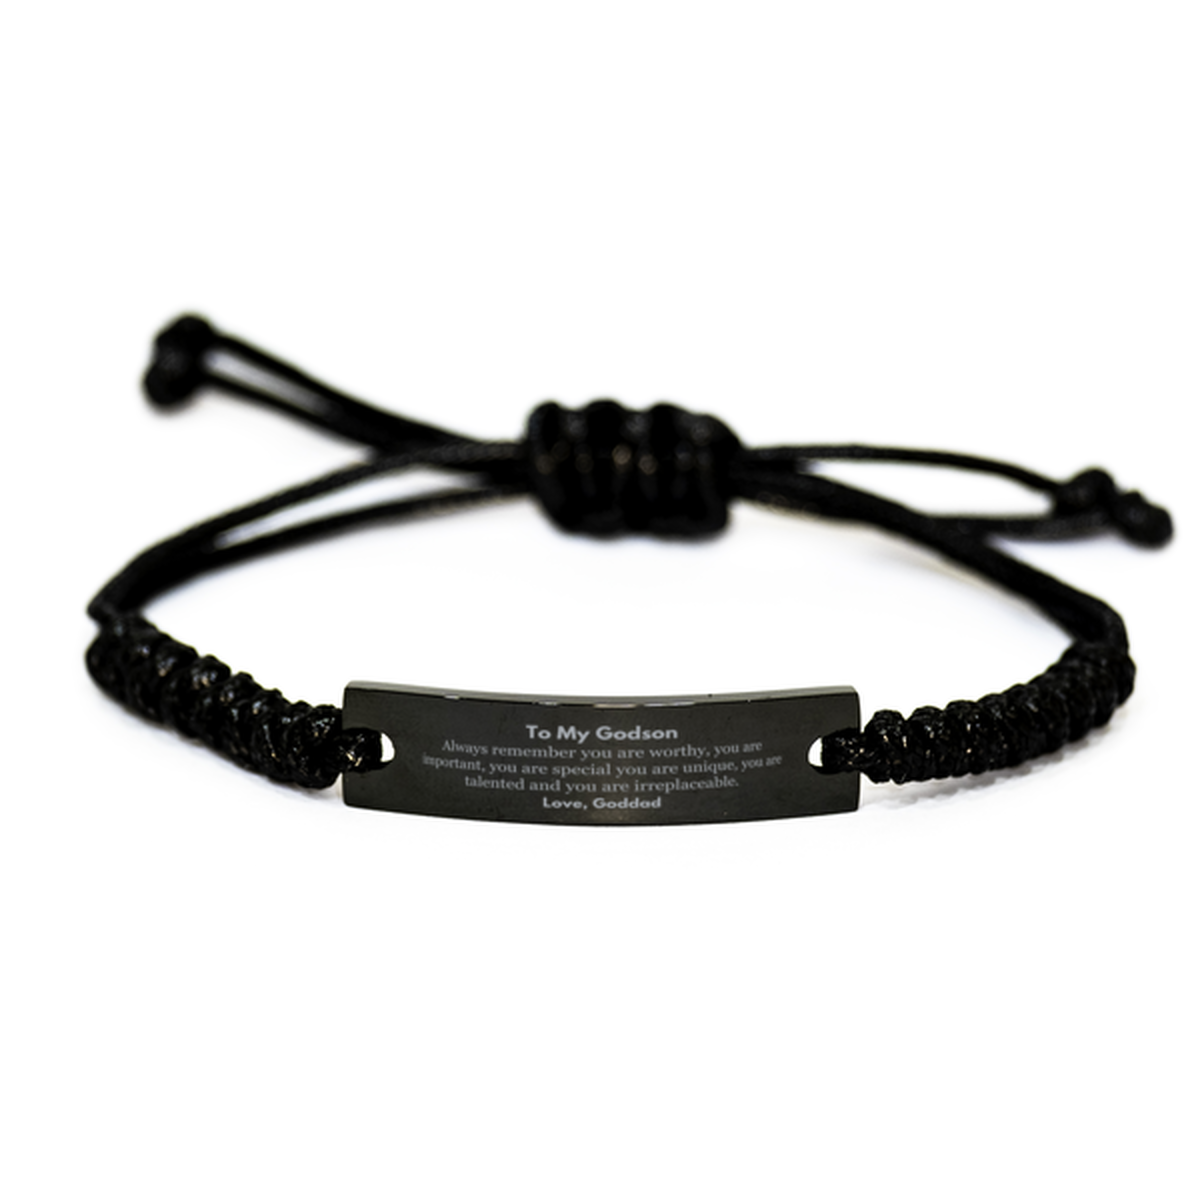 Godson Birthday Gifts from Goddad, Inspirational Black Rope Bracelet for Godson Christmas Graduation Gifts for Godson Always remember you are worthy, you are important. Love, Goddad